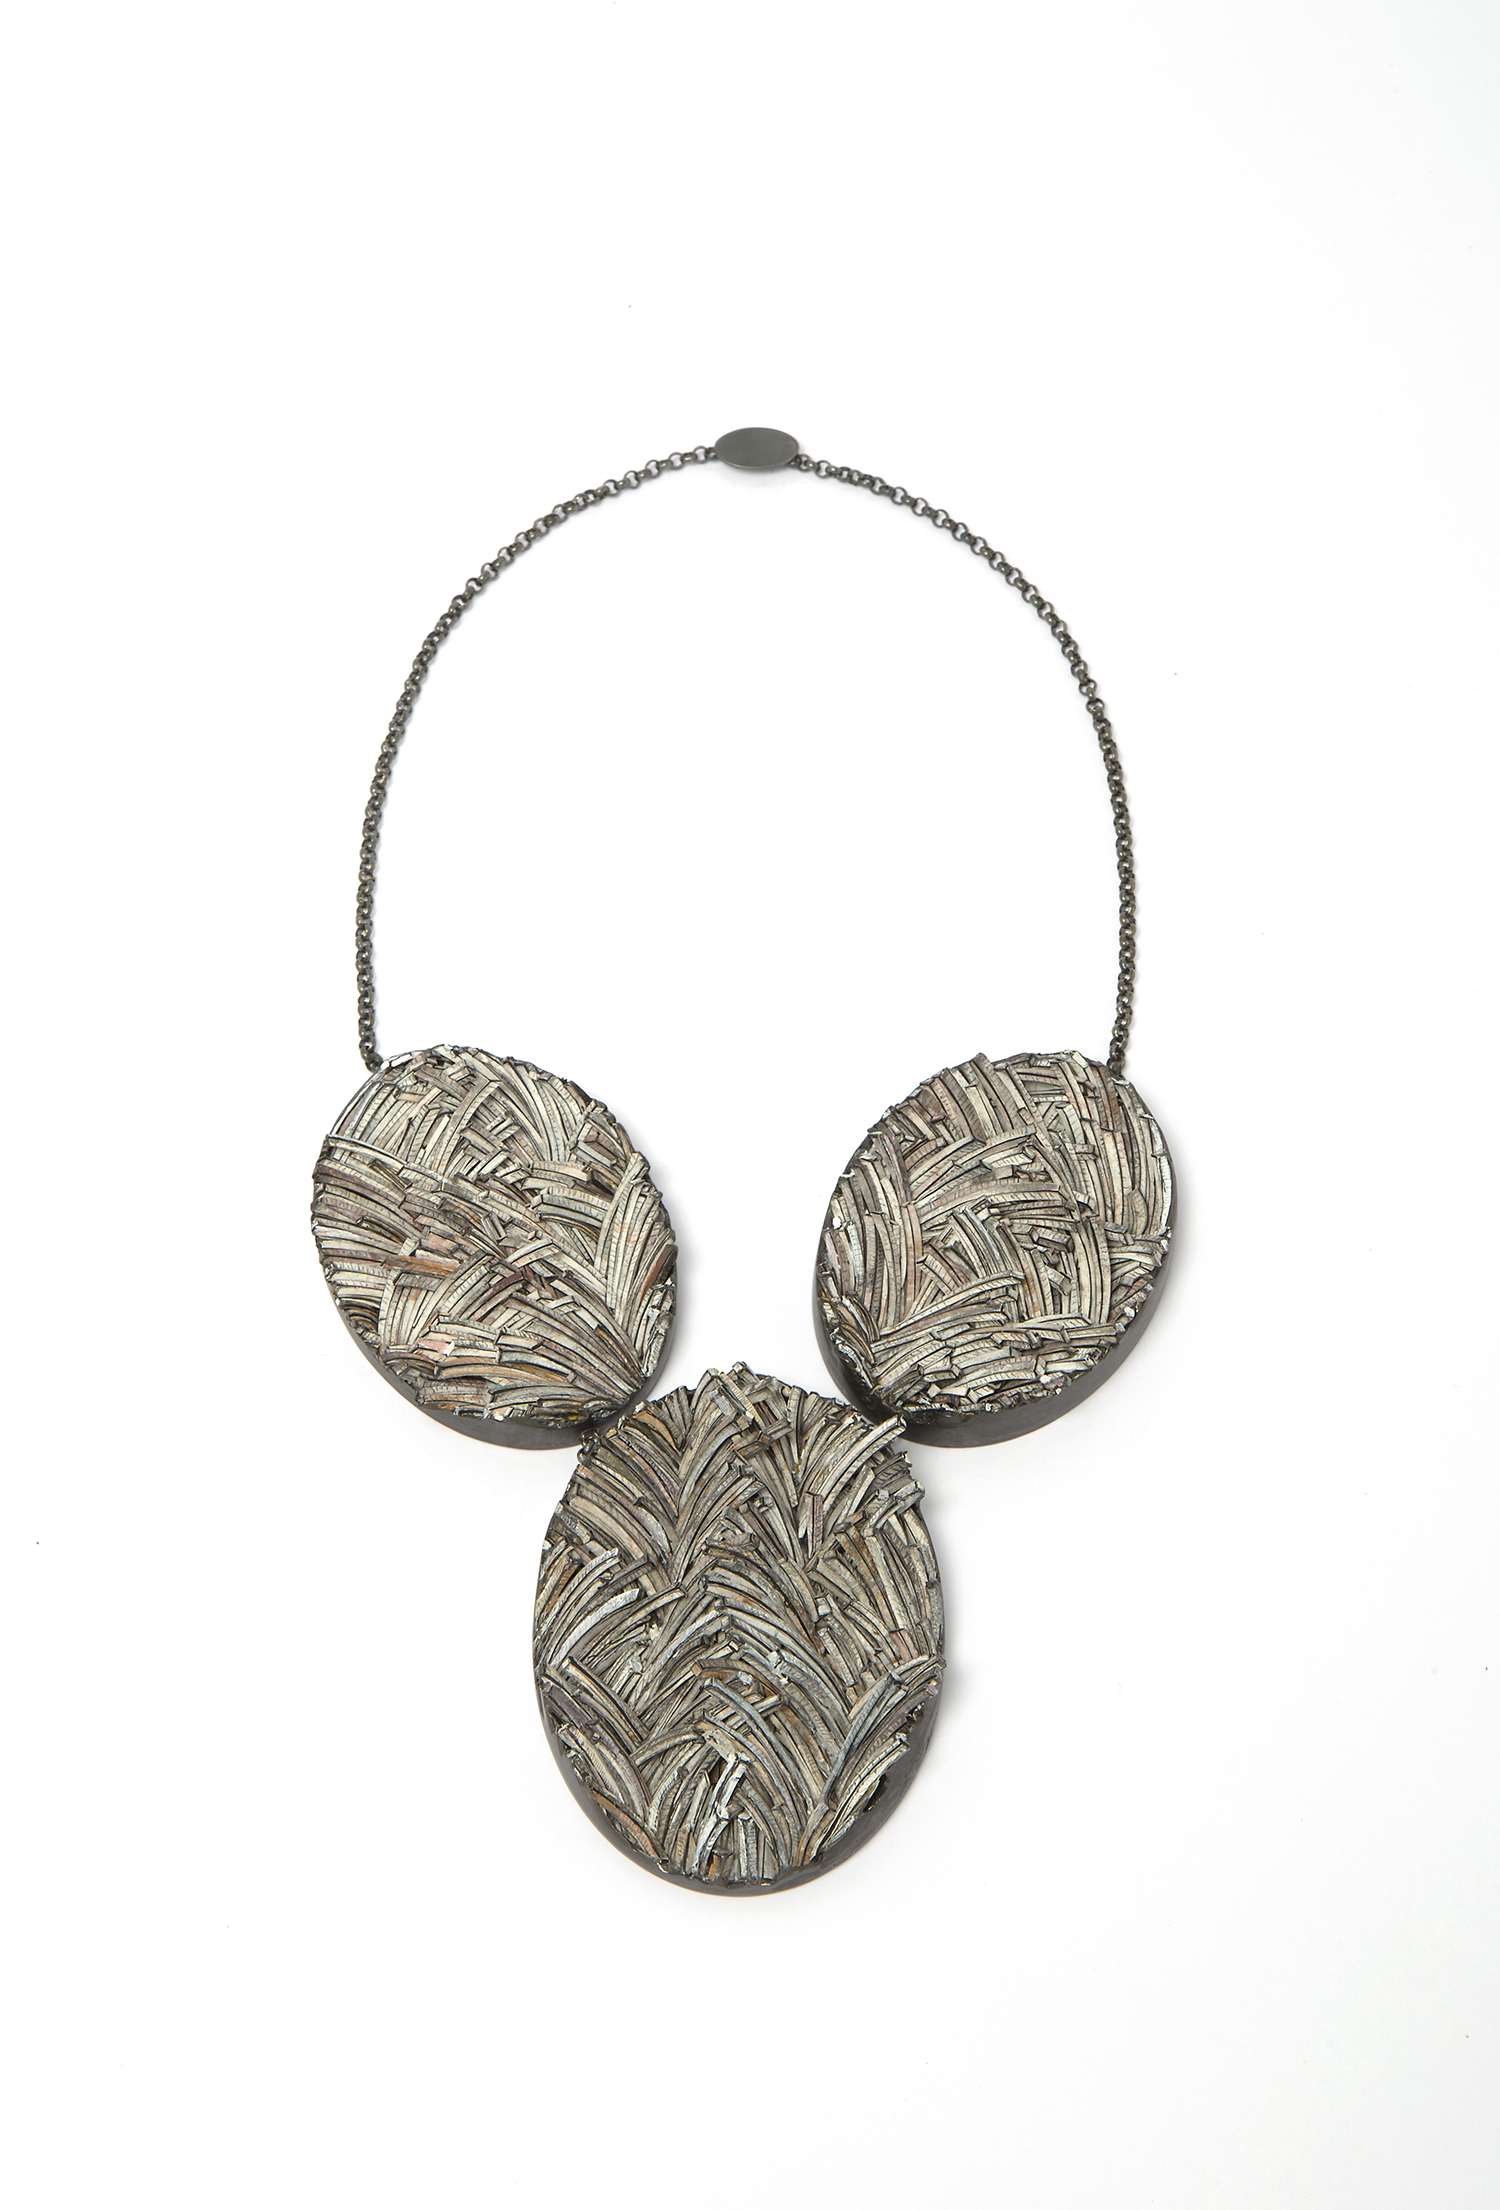 Untitled | Necklace | 2017 | Paper, paint, silver, wood, graphite | 300X350X35mm